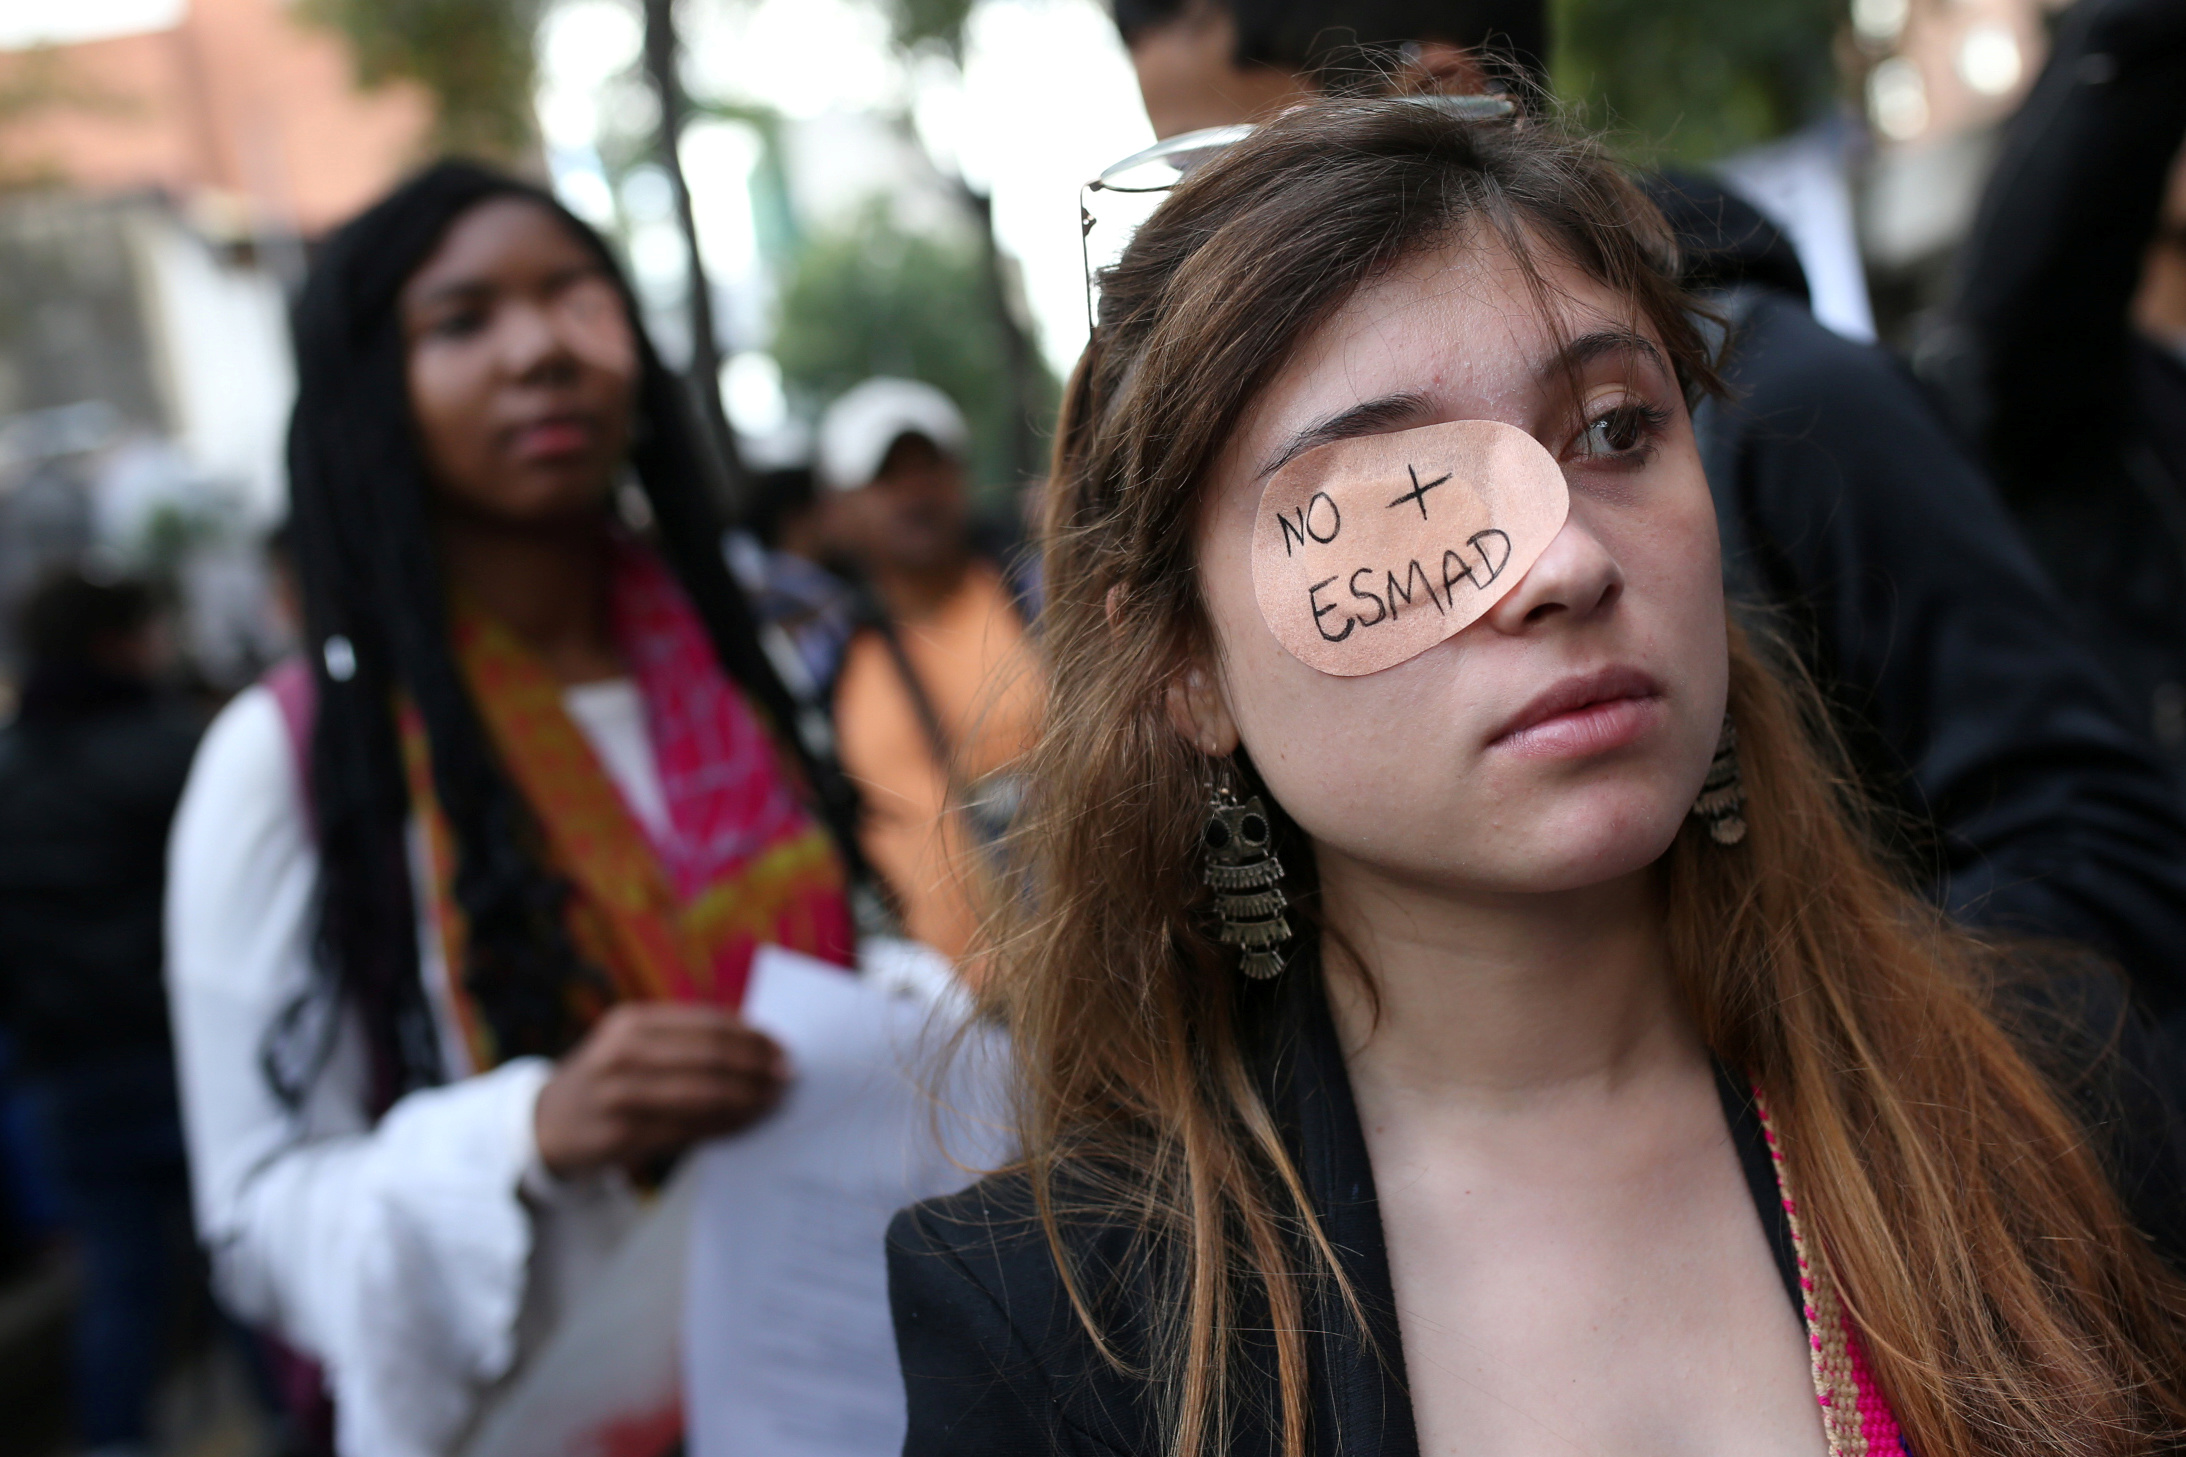 A woman with a patch on her eye that reads "No more ESMAD" is seen during a demonstration in honour of Dilan Cruz, a teenage demonstrator who died after being injured by a tear gas canister during an initial strike, in Bogota, Colombia December 23, 2019. REUTERS/Luisa Gonzalez